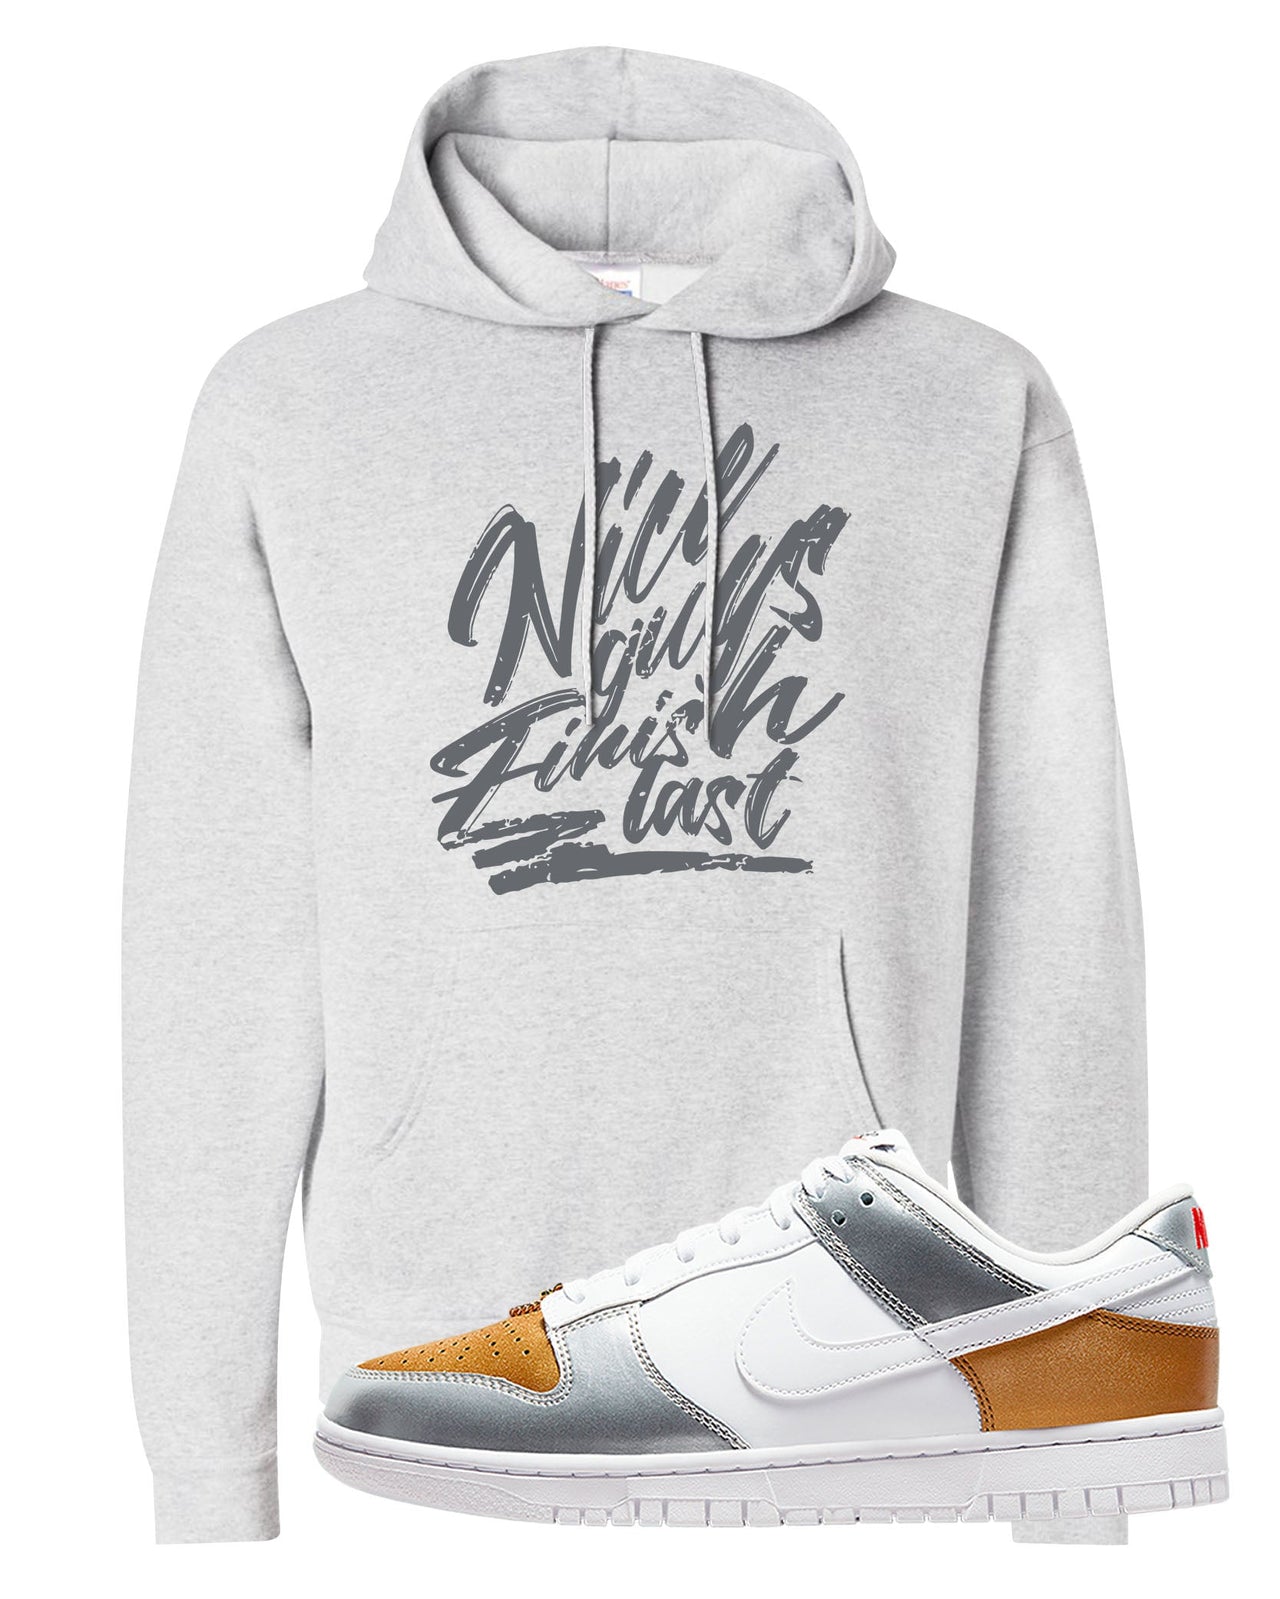 Gold Silver Red Low Dunks Hoodie | Nice Guys Finish Last, Ash